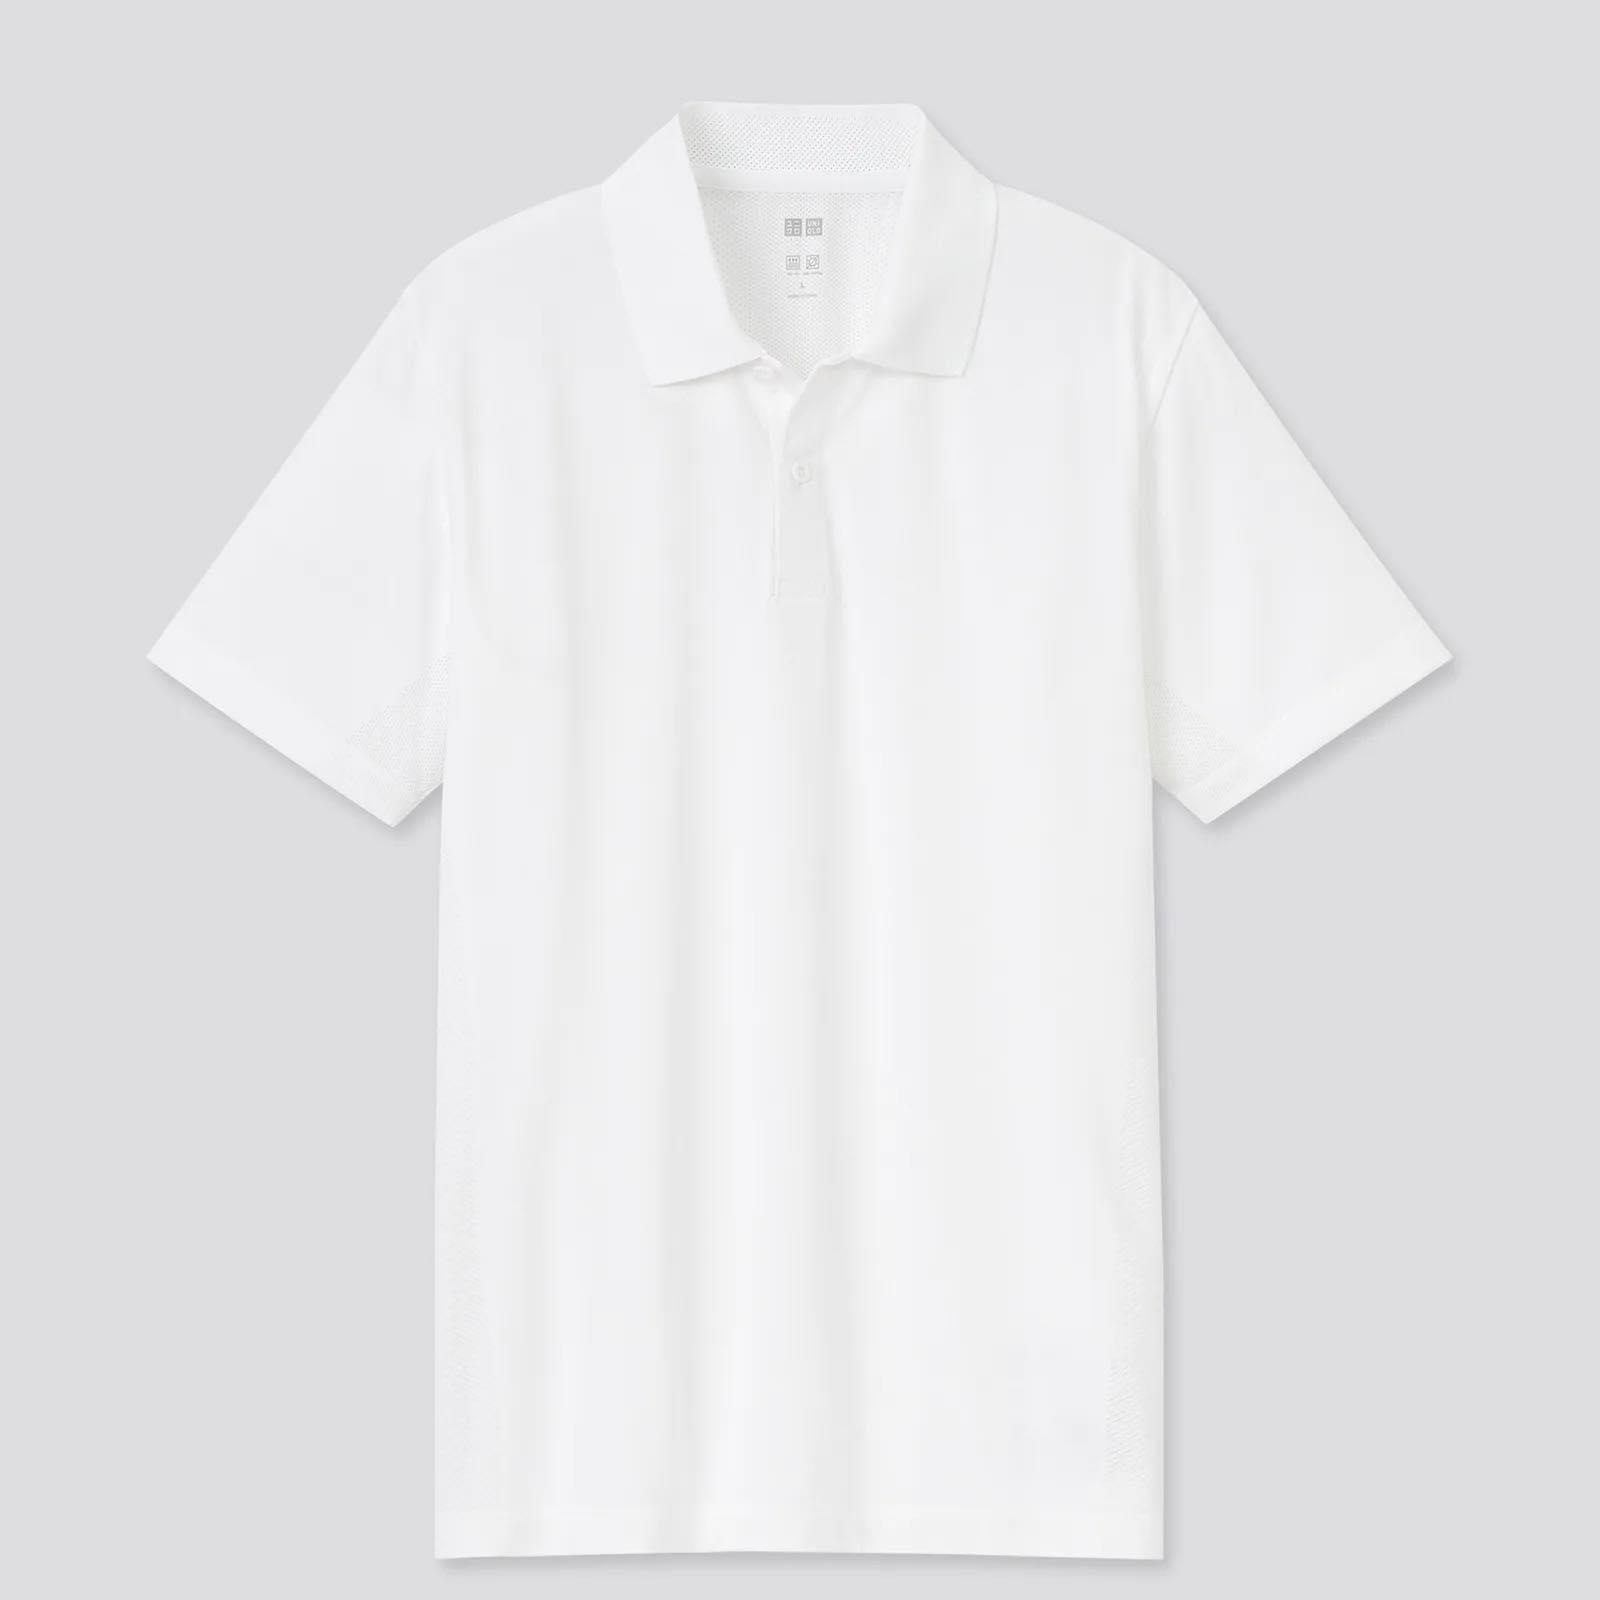 Uniqlo Singapore  MEN Dry Pique Short Sleeve Polo Shirt 1990 UP  2990 Shop our Online Exclusive Limited Offers here httpsuniqlocom2rlKoxf  Offer ends 15 June  Facebook